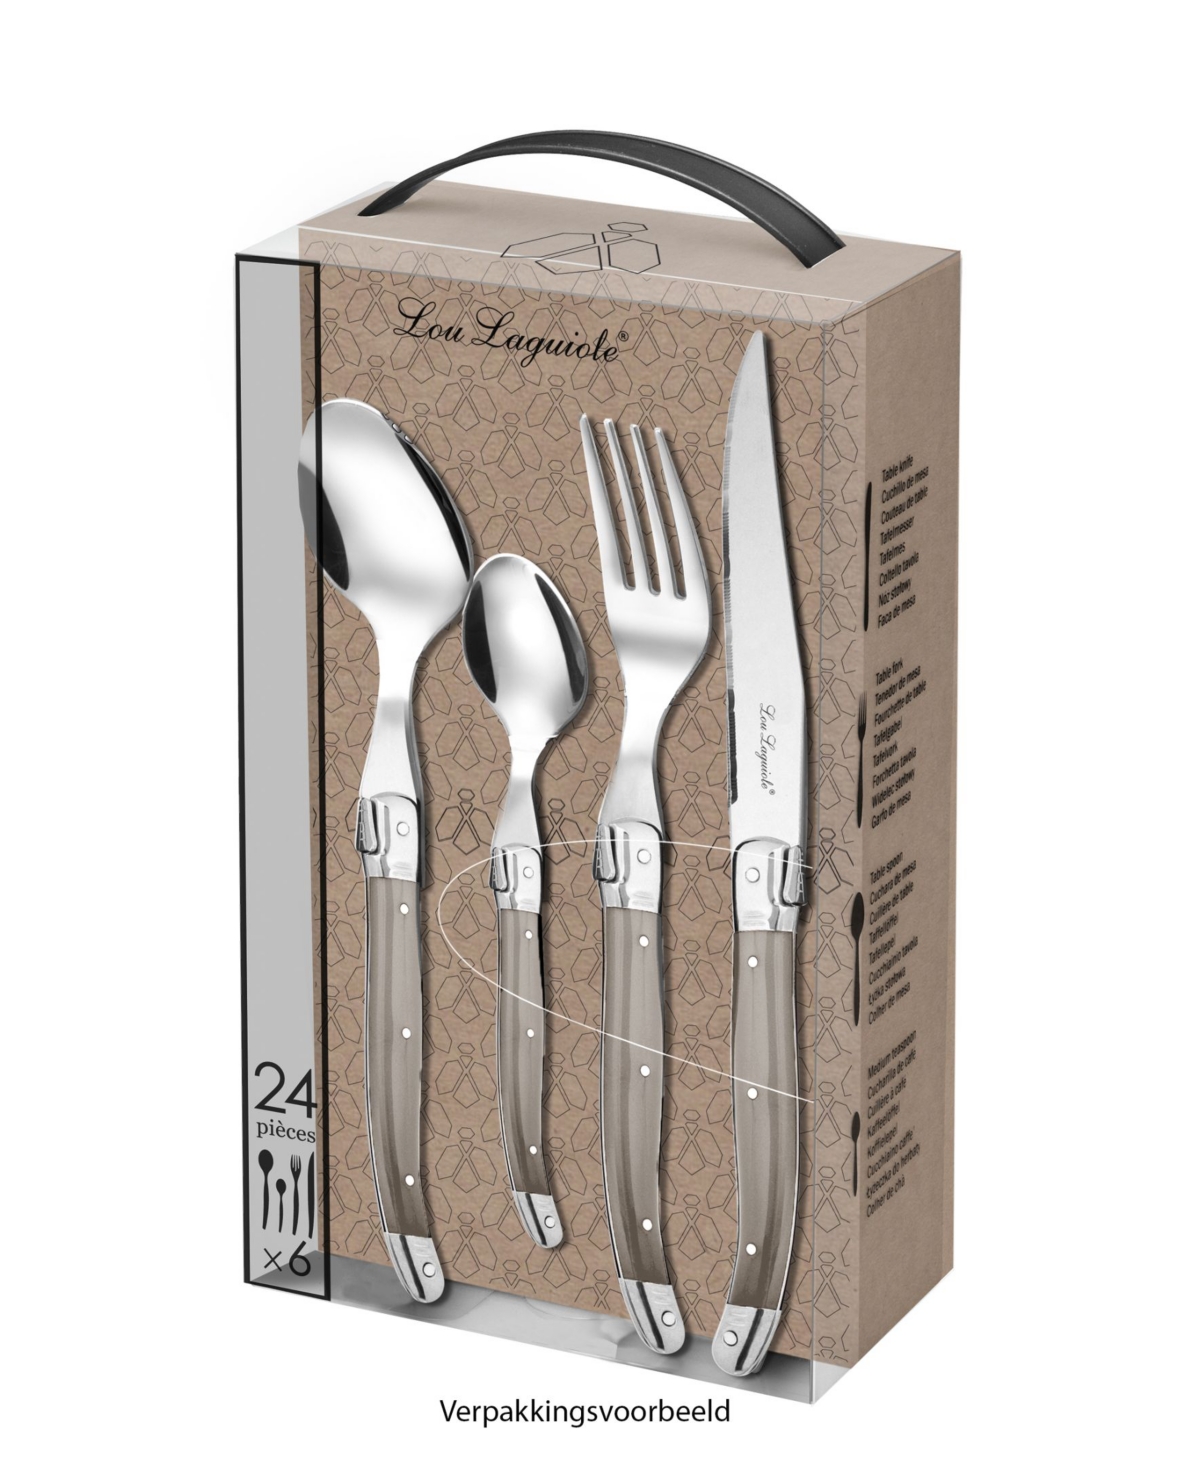 Lou Laguiole Tradition 24 Pieces Flatware Set In Silver-tone,taupe